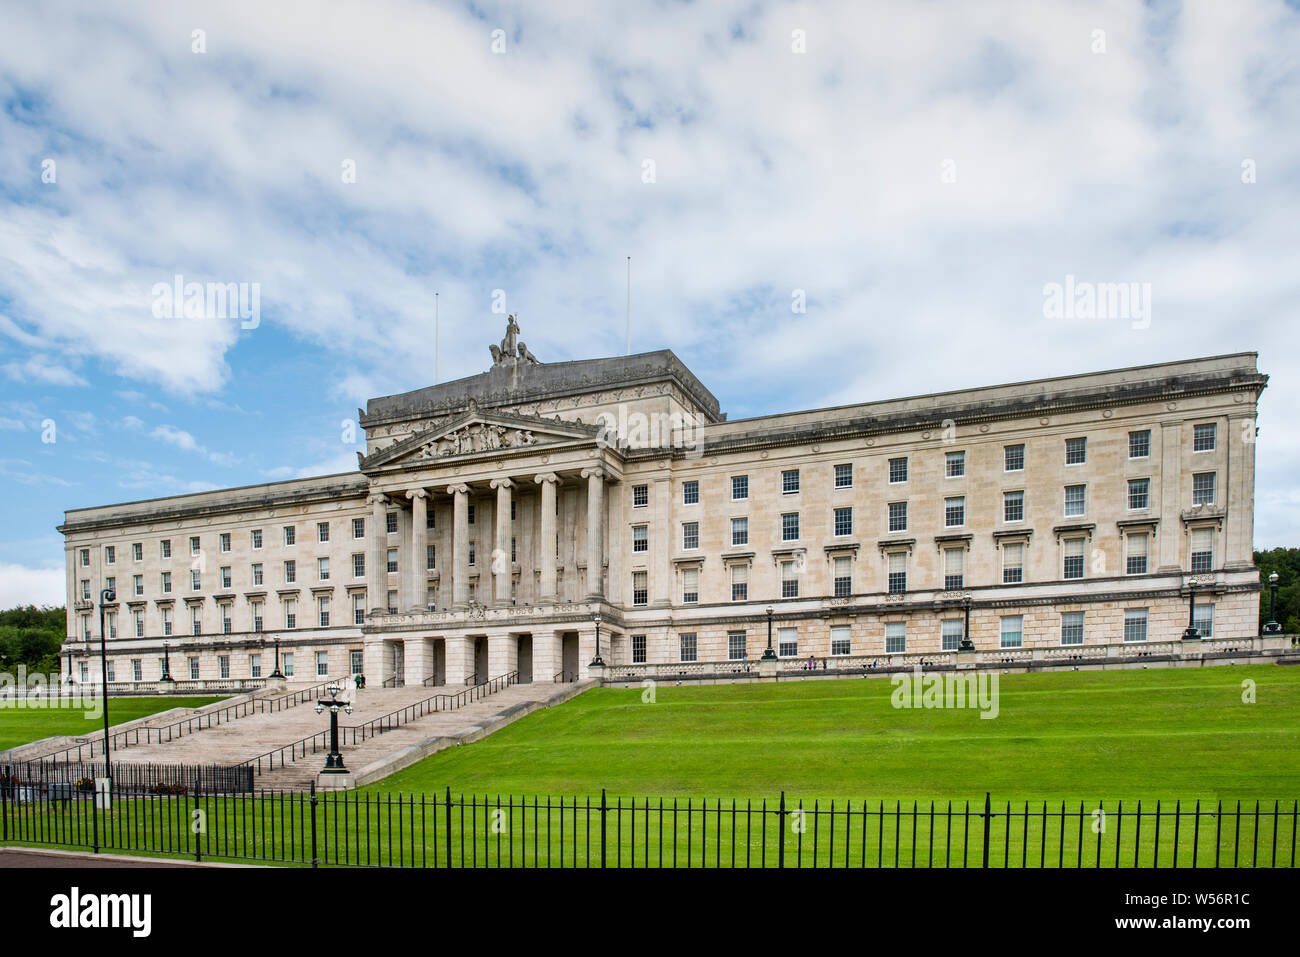 Stormont, the parliament building of the Northern Ireland Assembly where the Northern Ireland devolved government meet. Stock Photo